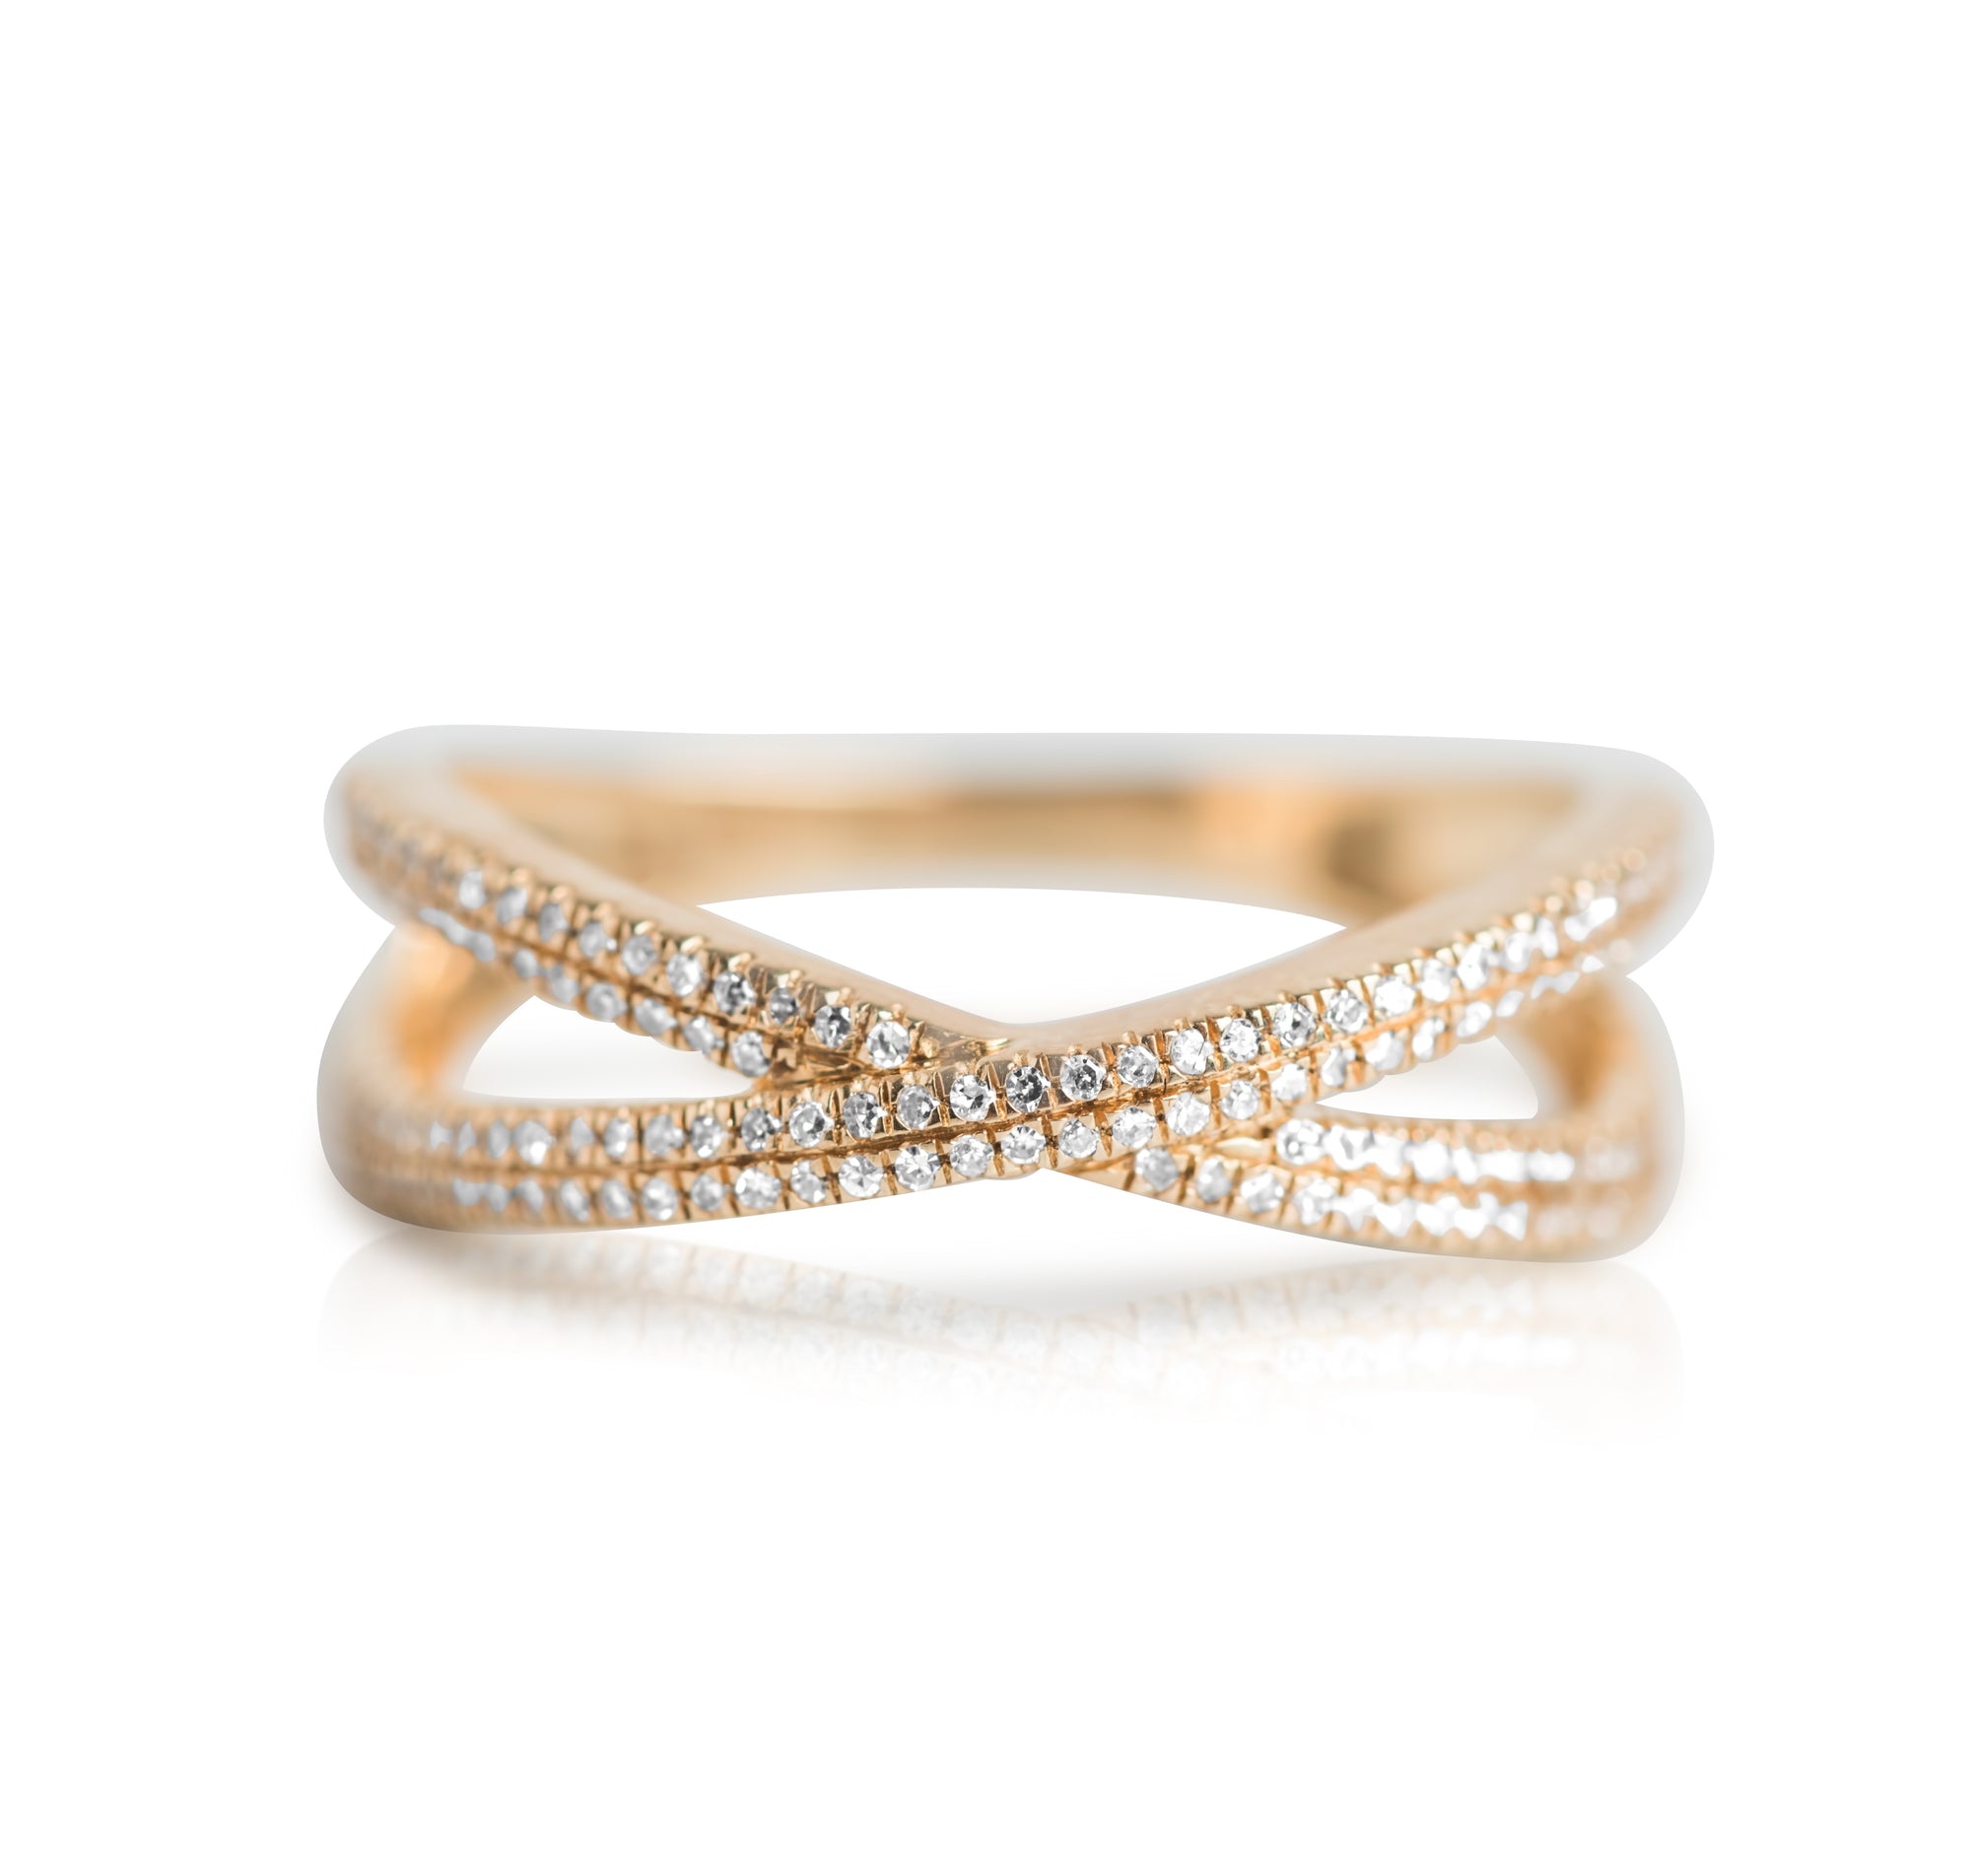 The Hottest Jewelry Trends Right Now! | Philadelphia jeweler sells the latest jewelry trends